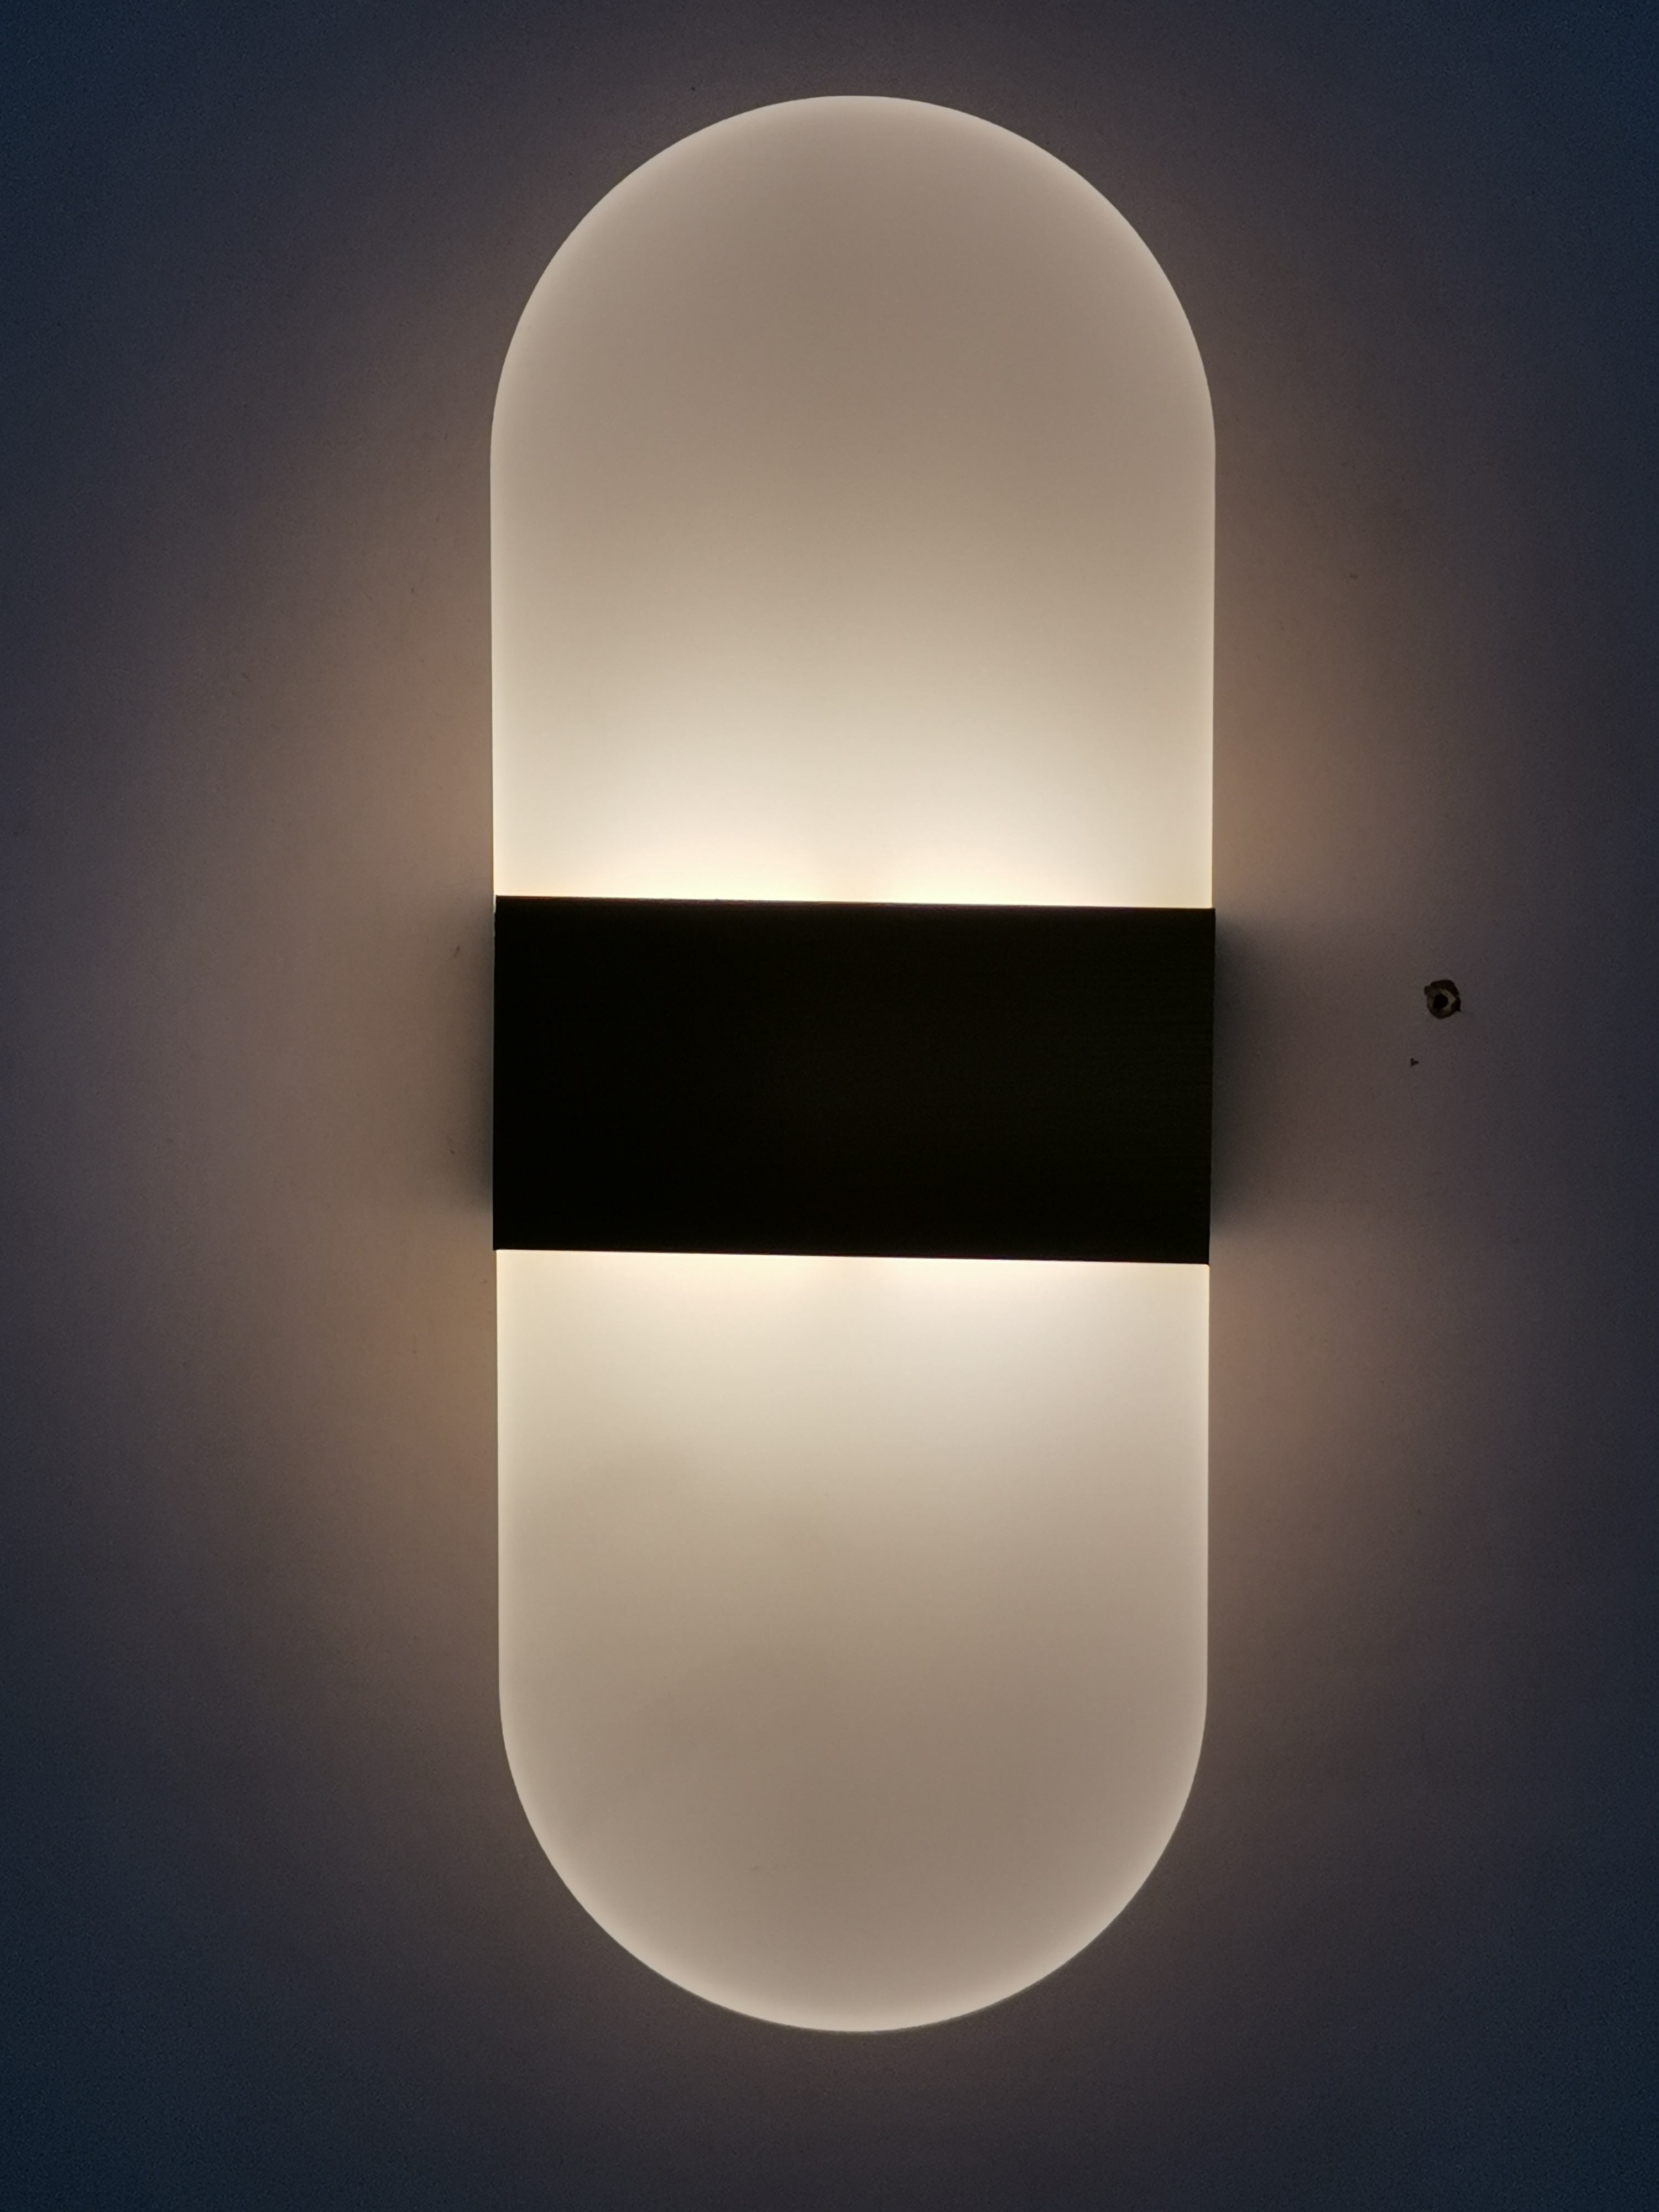 6W Oval Wall Lamp Acrylic Wall Lamp Rectangular Wall Lamp LED Wall Sconces AC85-265V Indoor Aluminum Round Shape Lights Wall Mount Lamp for Living Room Bedroom Hotel Restaurant Lighting